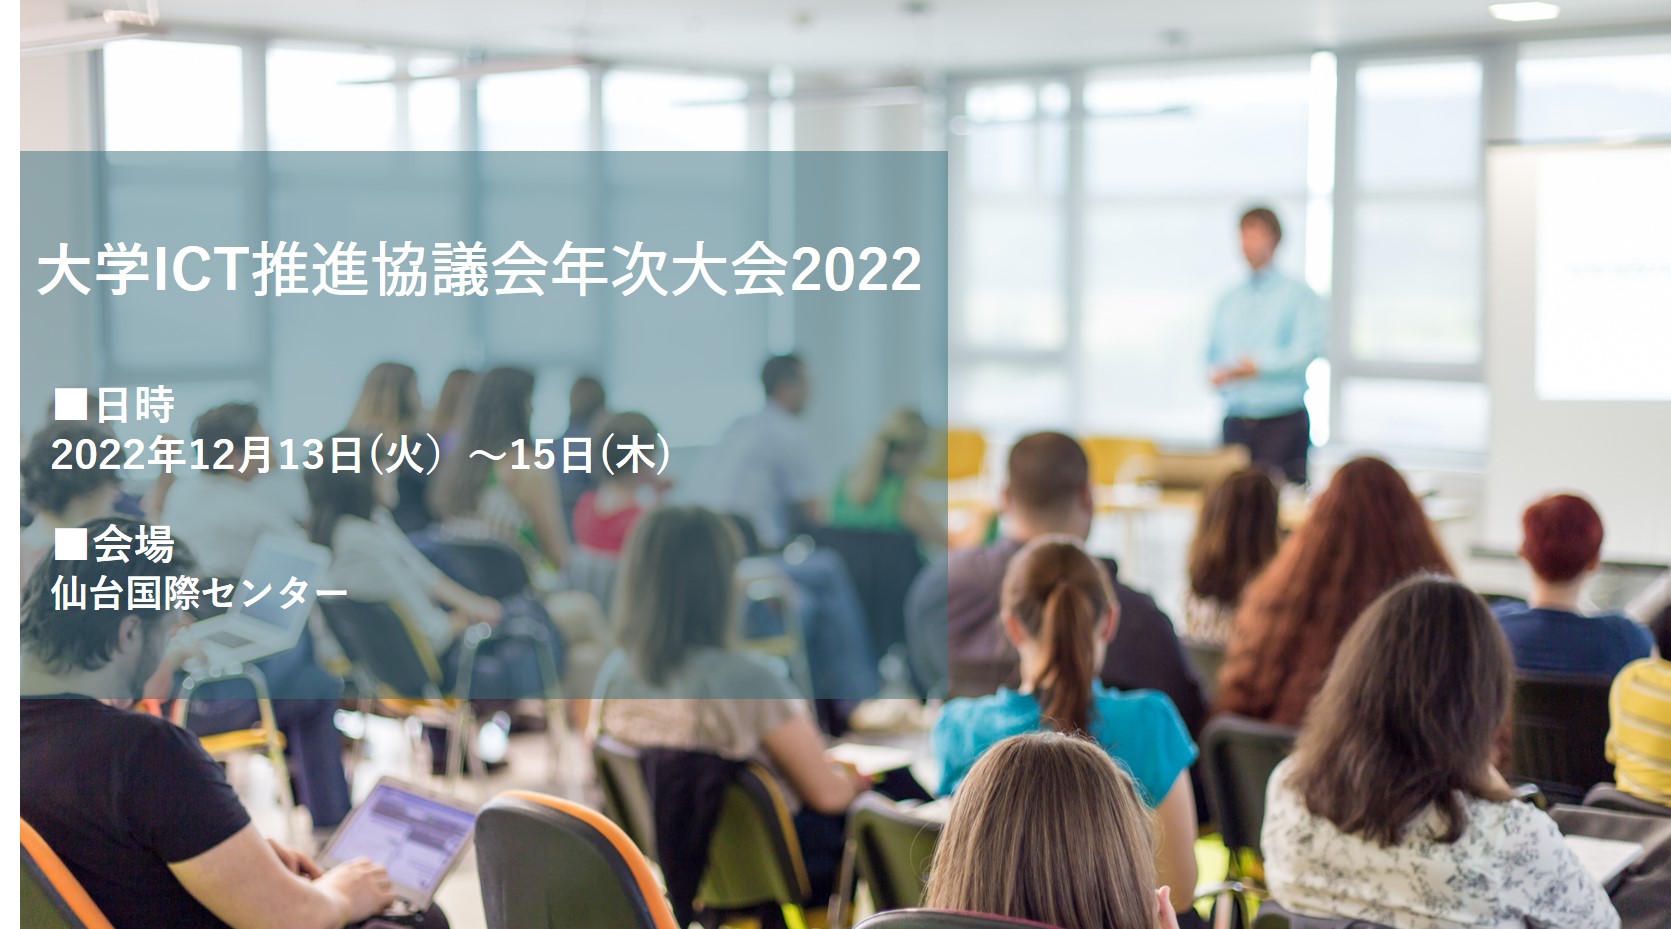 2022 IEEE International Workshop on Electromagnetics: Applications and Student Innovation Competition (iWEM2022)